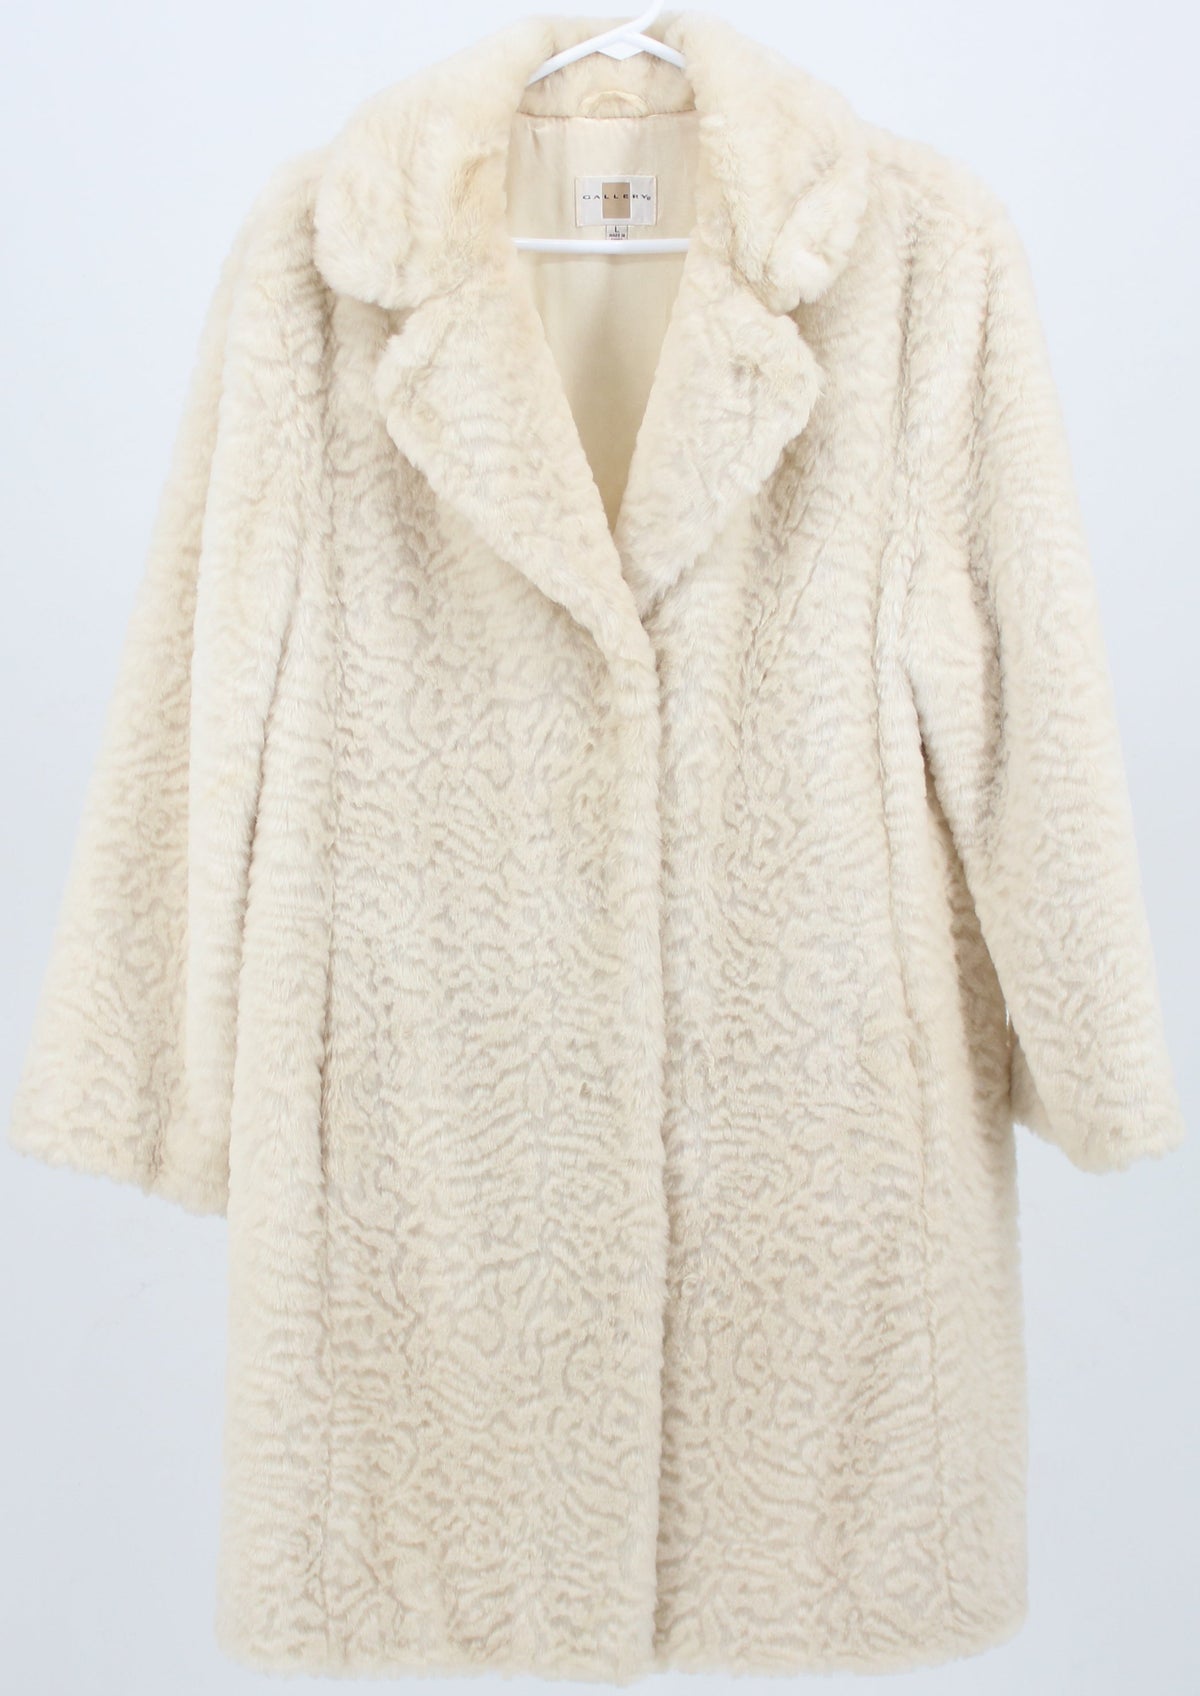 Gallery Mid Off White Jacquard Faux Fur Coat